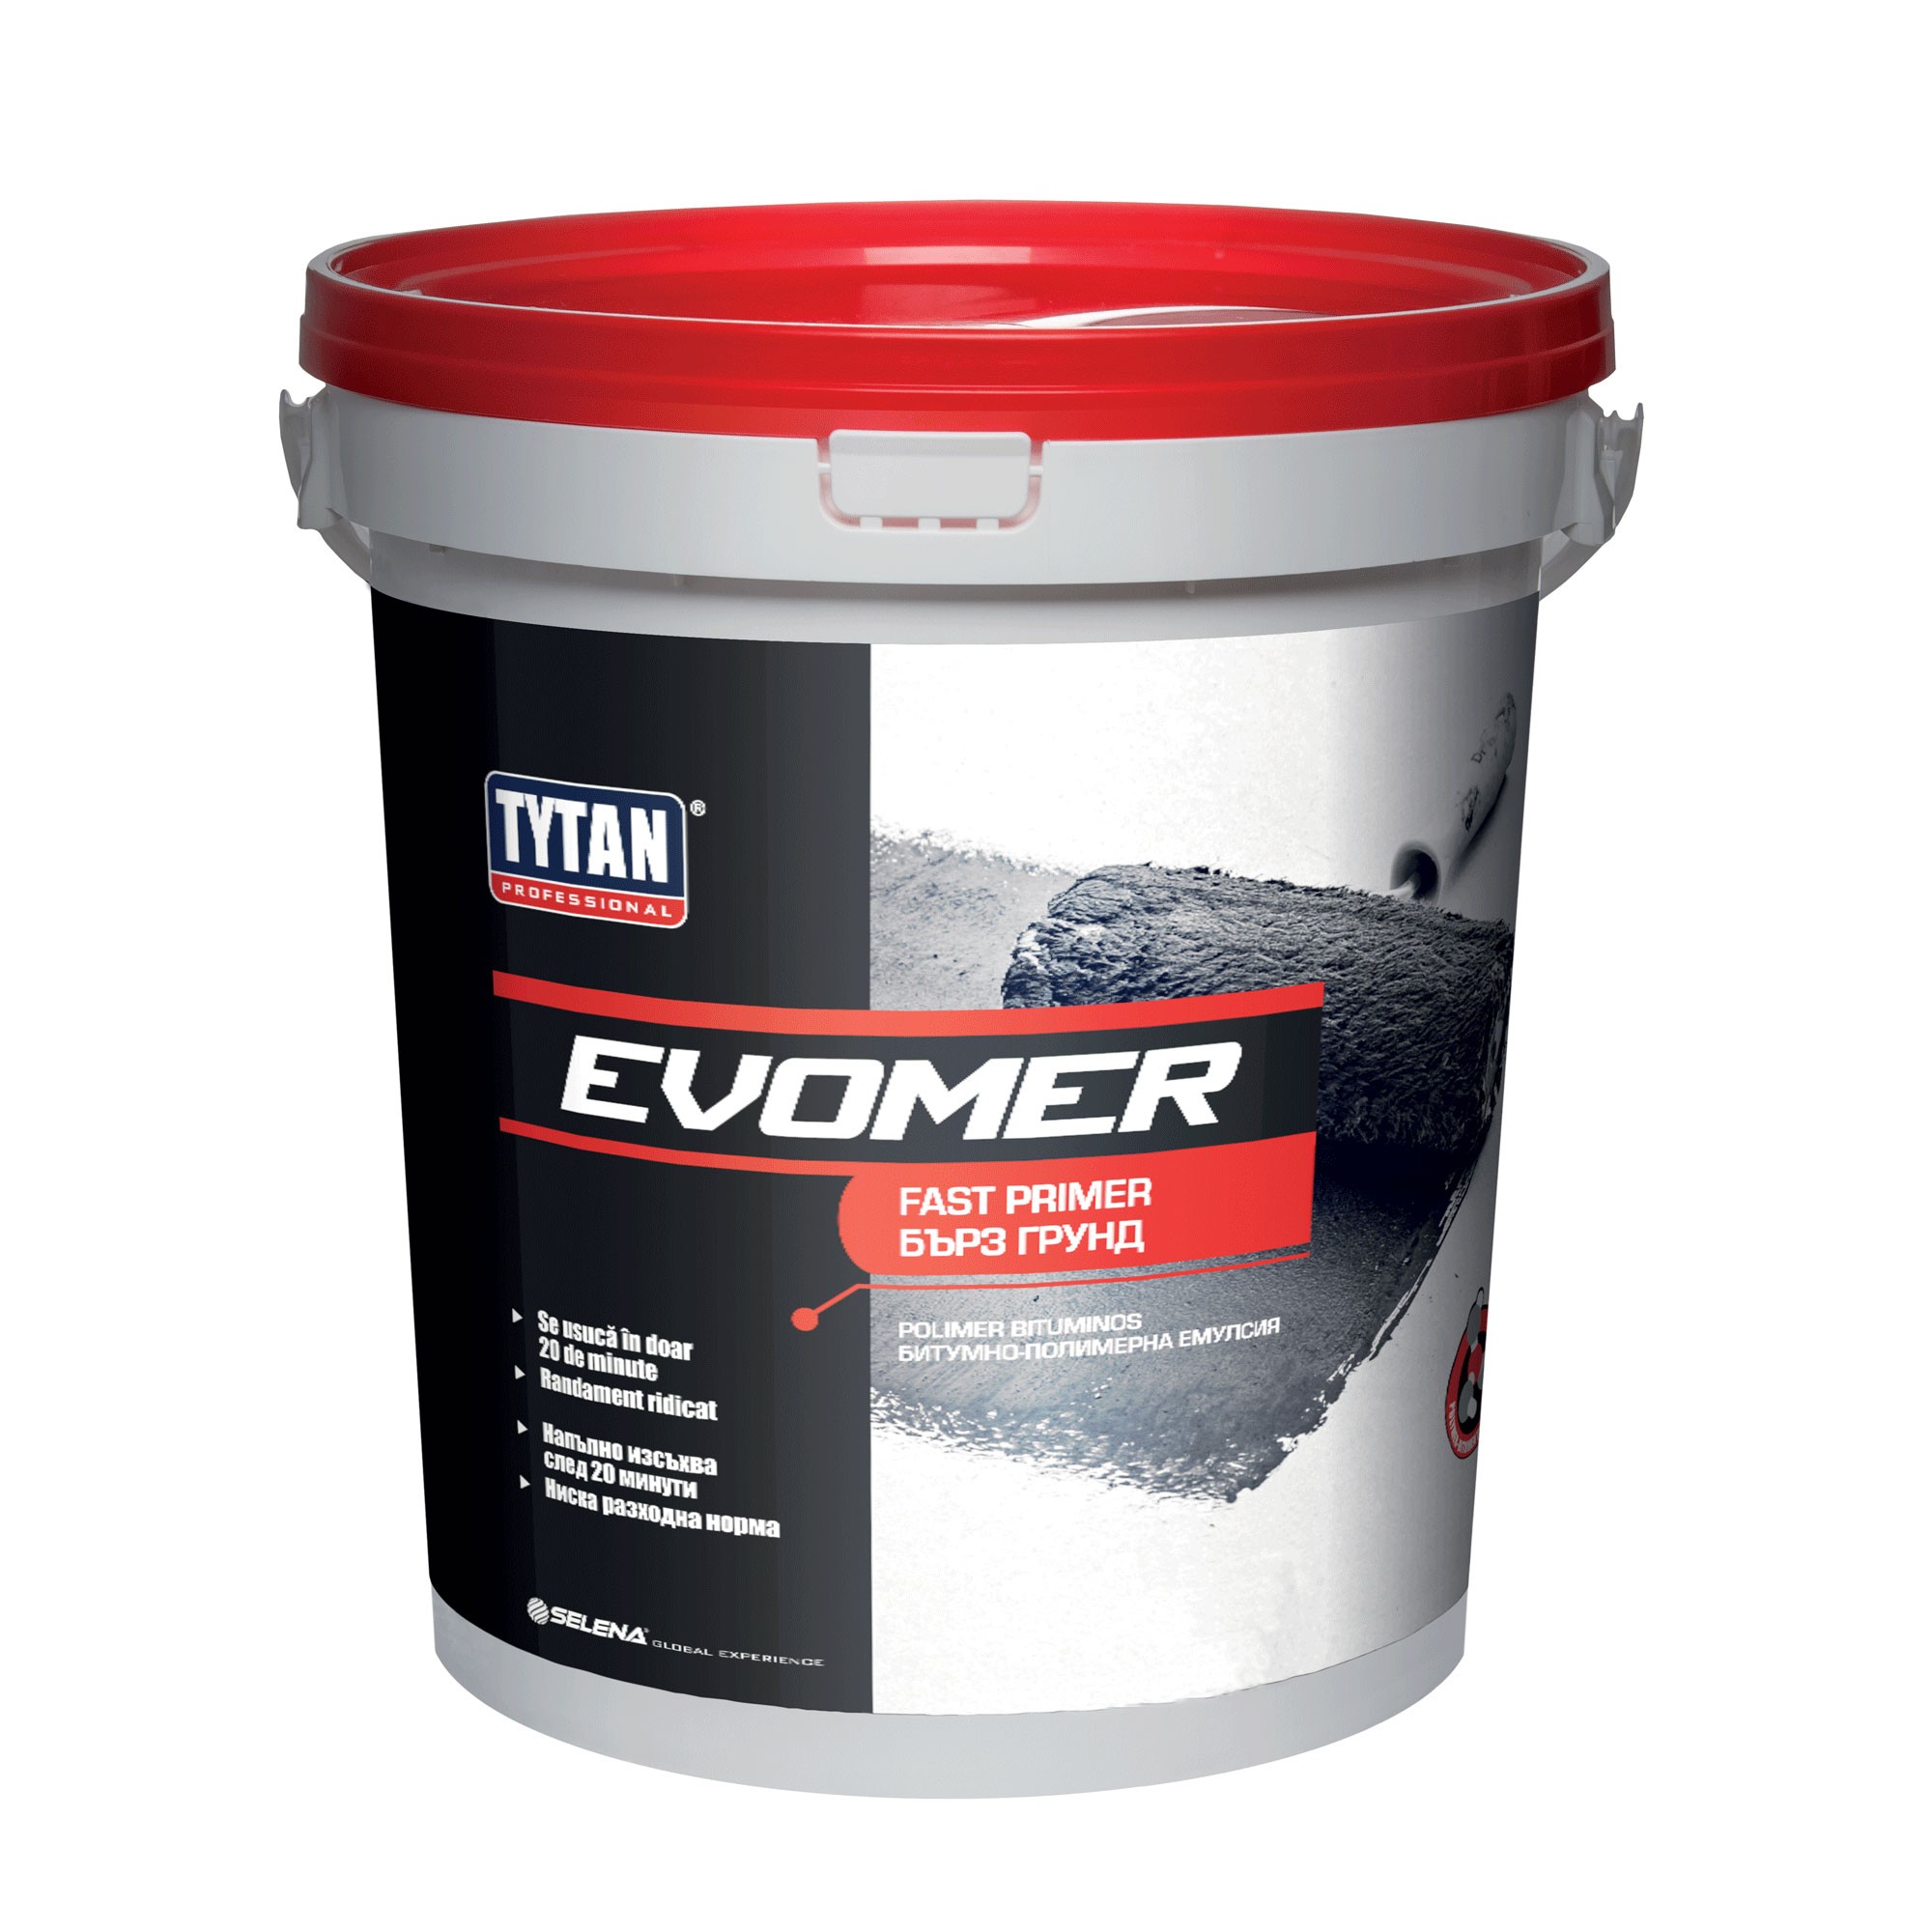 Products for waterproofing and sealing - Quick primer Evomer Fast Primer Tytan Professional for roof waterproofing 18kg, https:maxbau.ro